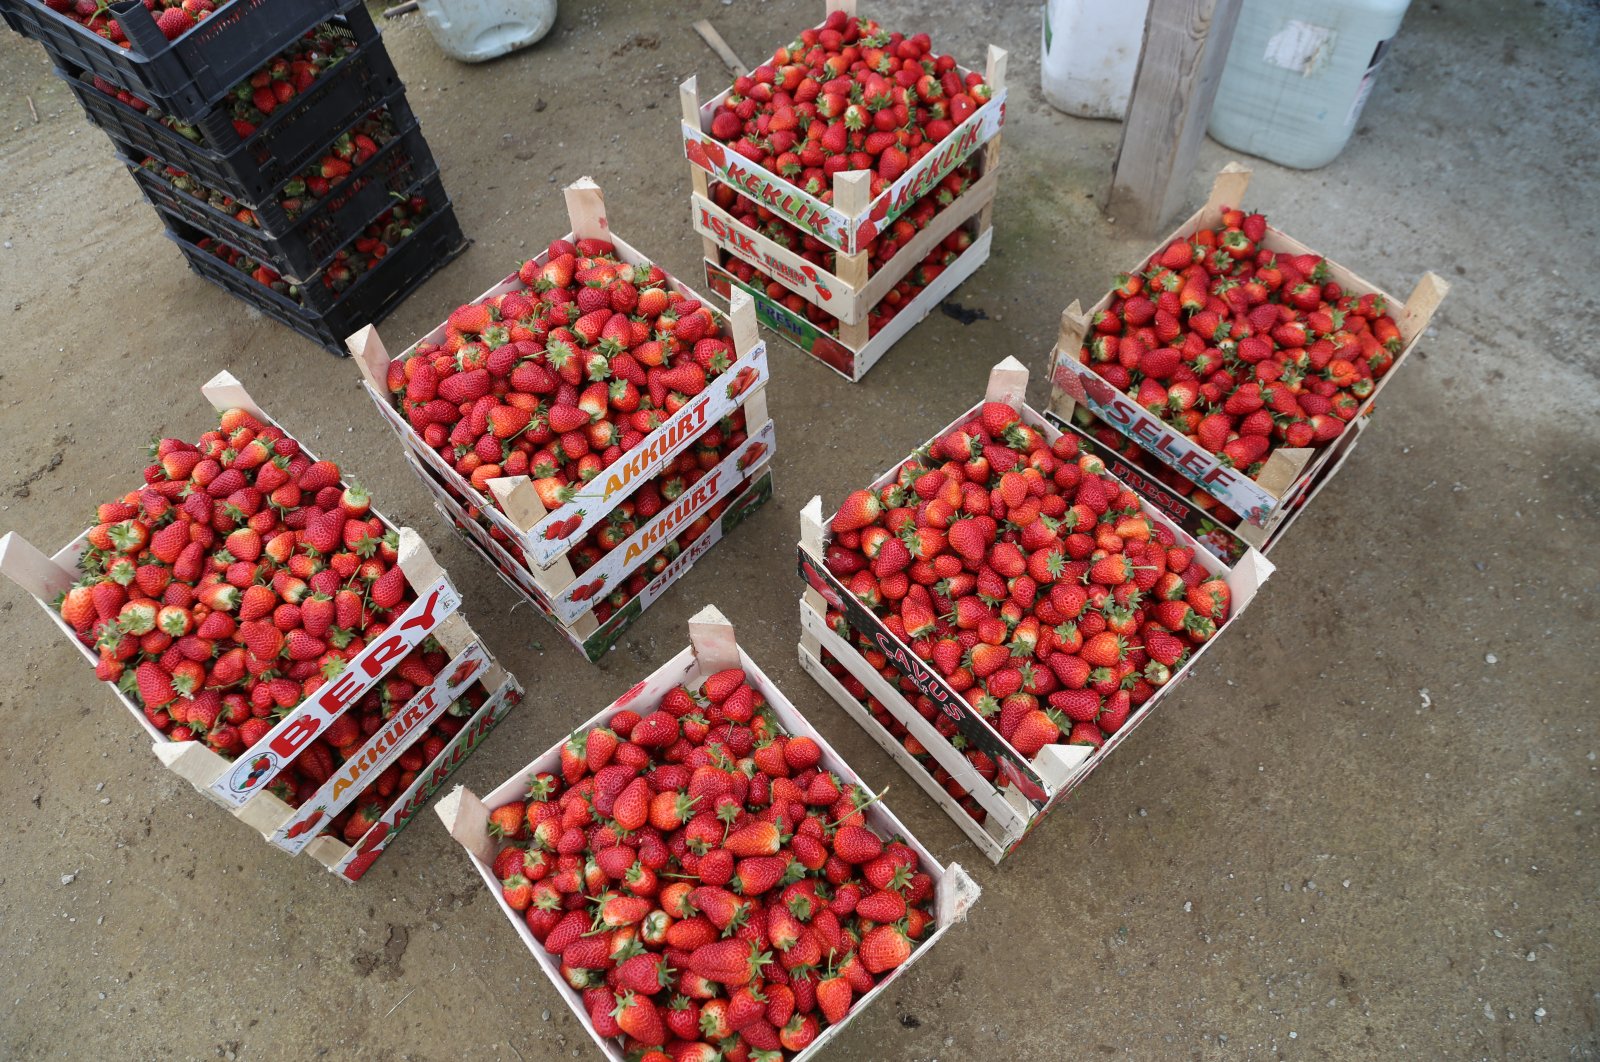 Strawberry production reached up to 1,000 tons annually in Ordu province in Turkey's Black Sea region, a region famous for hazelnut production, April 5, 2020. (AA Photo)